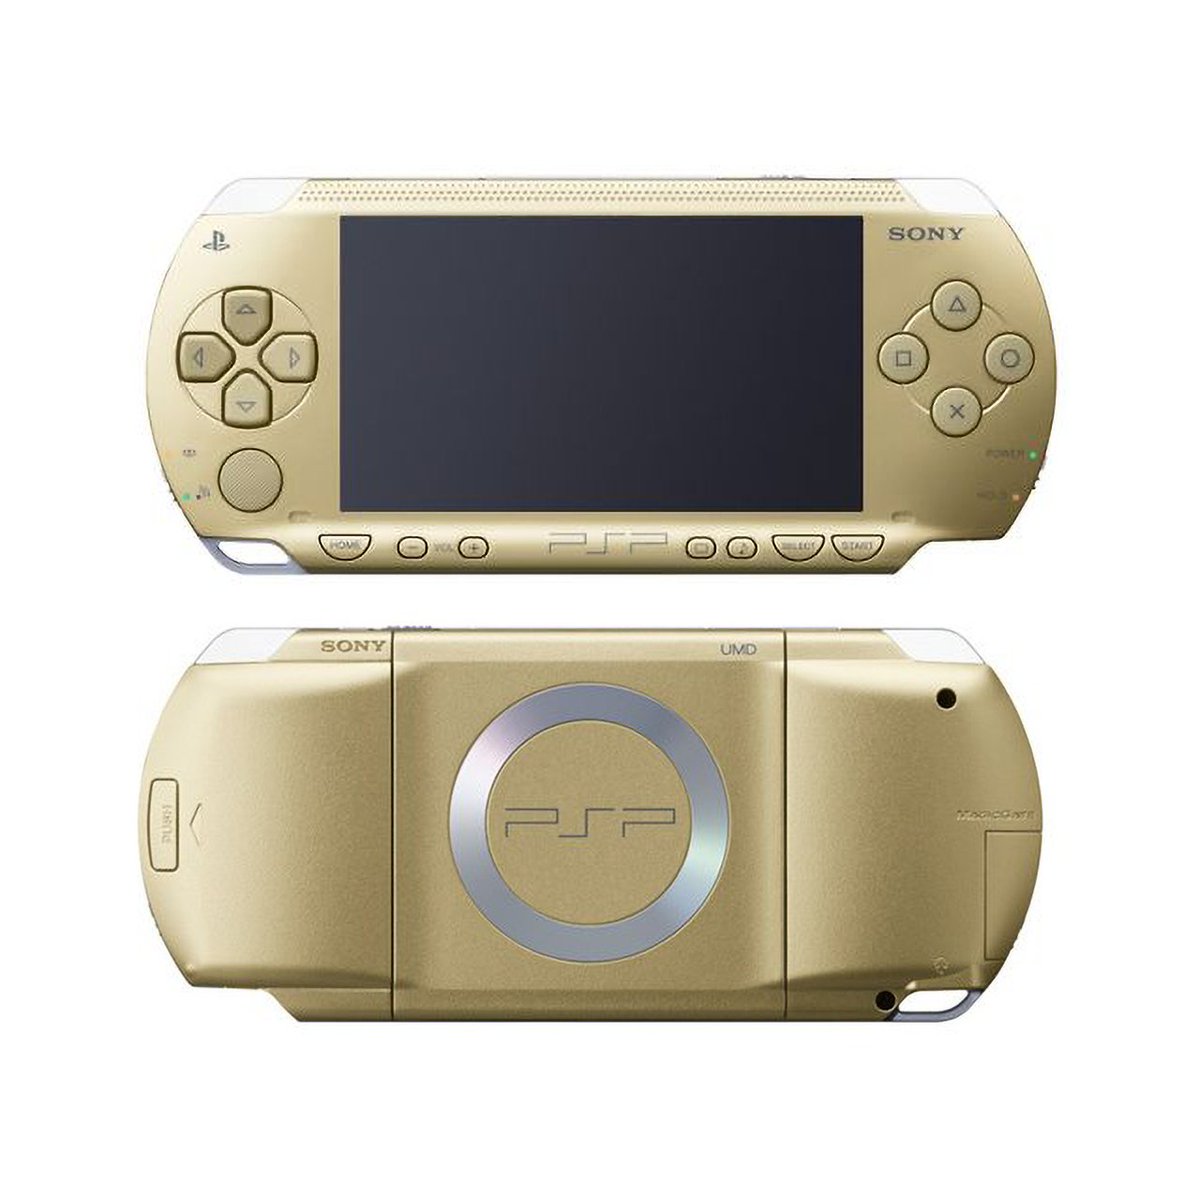 On January 10, 2007, Sony Computer Entertainment Japan announced the release of the elegant PSP Champagne Gold PSP-1000 CG on February 22, expanding its lineup to six colors alongside black, ceramic white, pink, silver, and metallic blue.